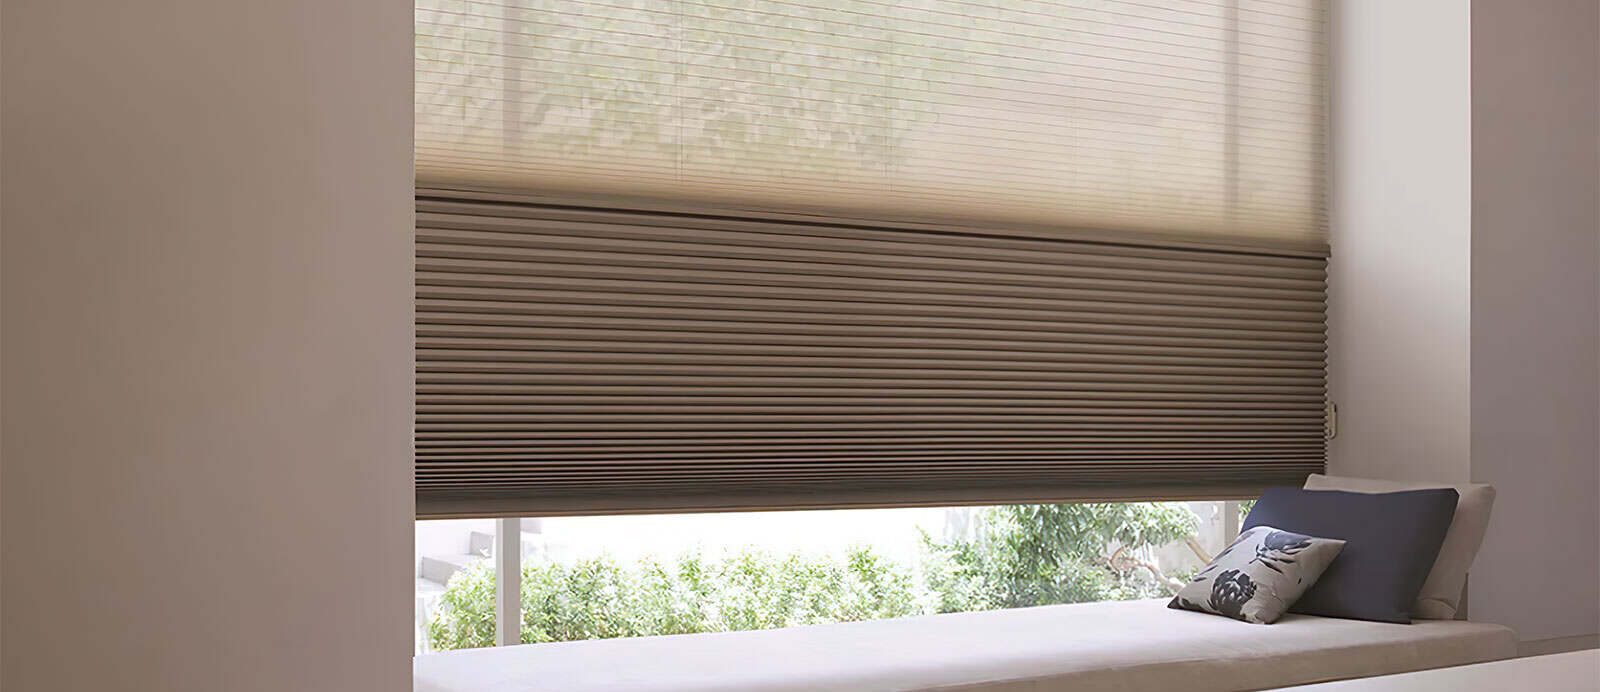 day night honeycomb blinds